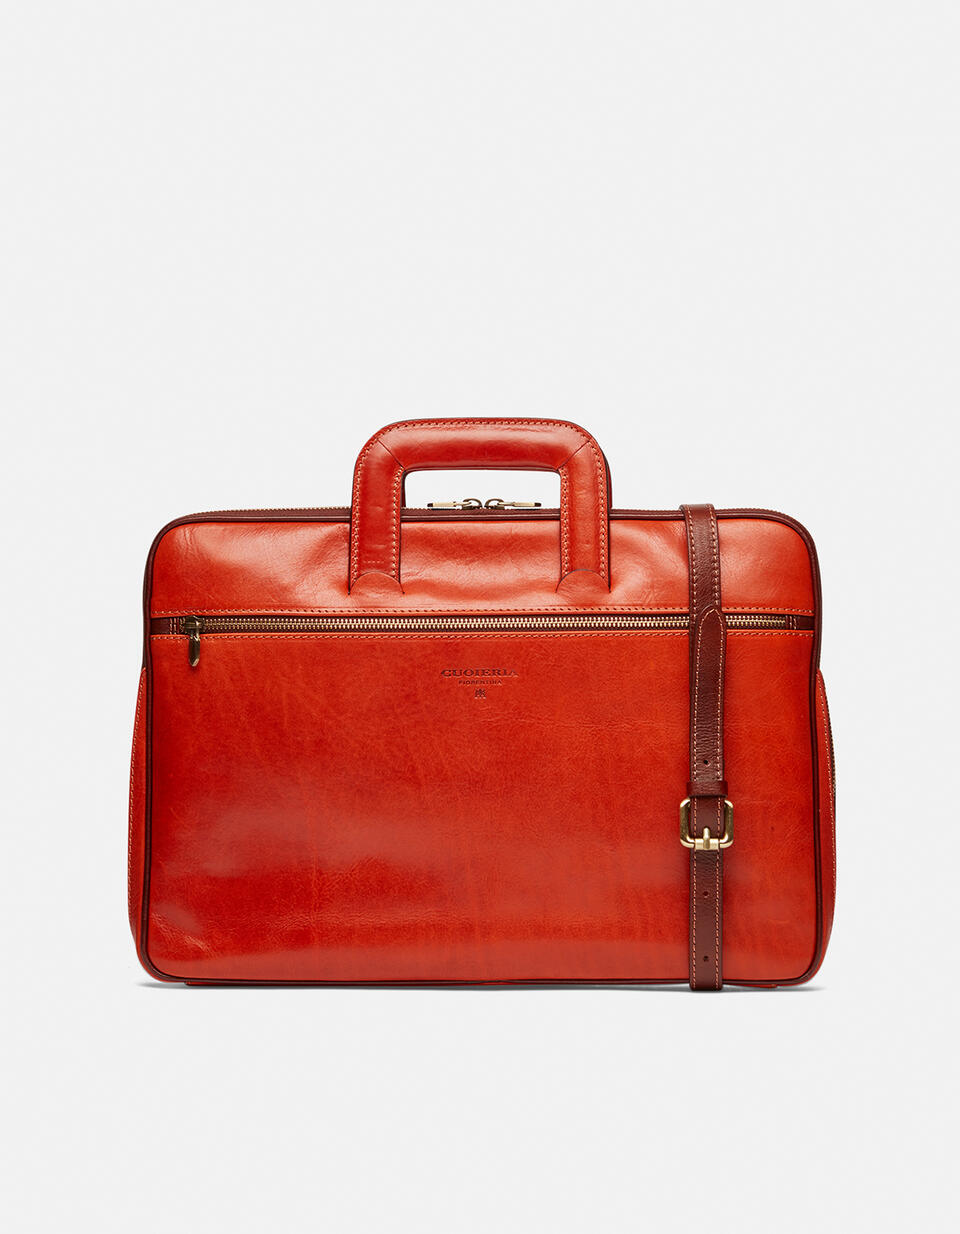 Laptop leather bag - Briefcases and Laptop Bags | Briefcases  - Briefcases and Laptop Bags | BriefcasesCuoieria Fiorentina